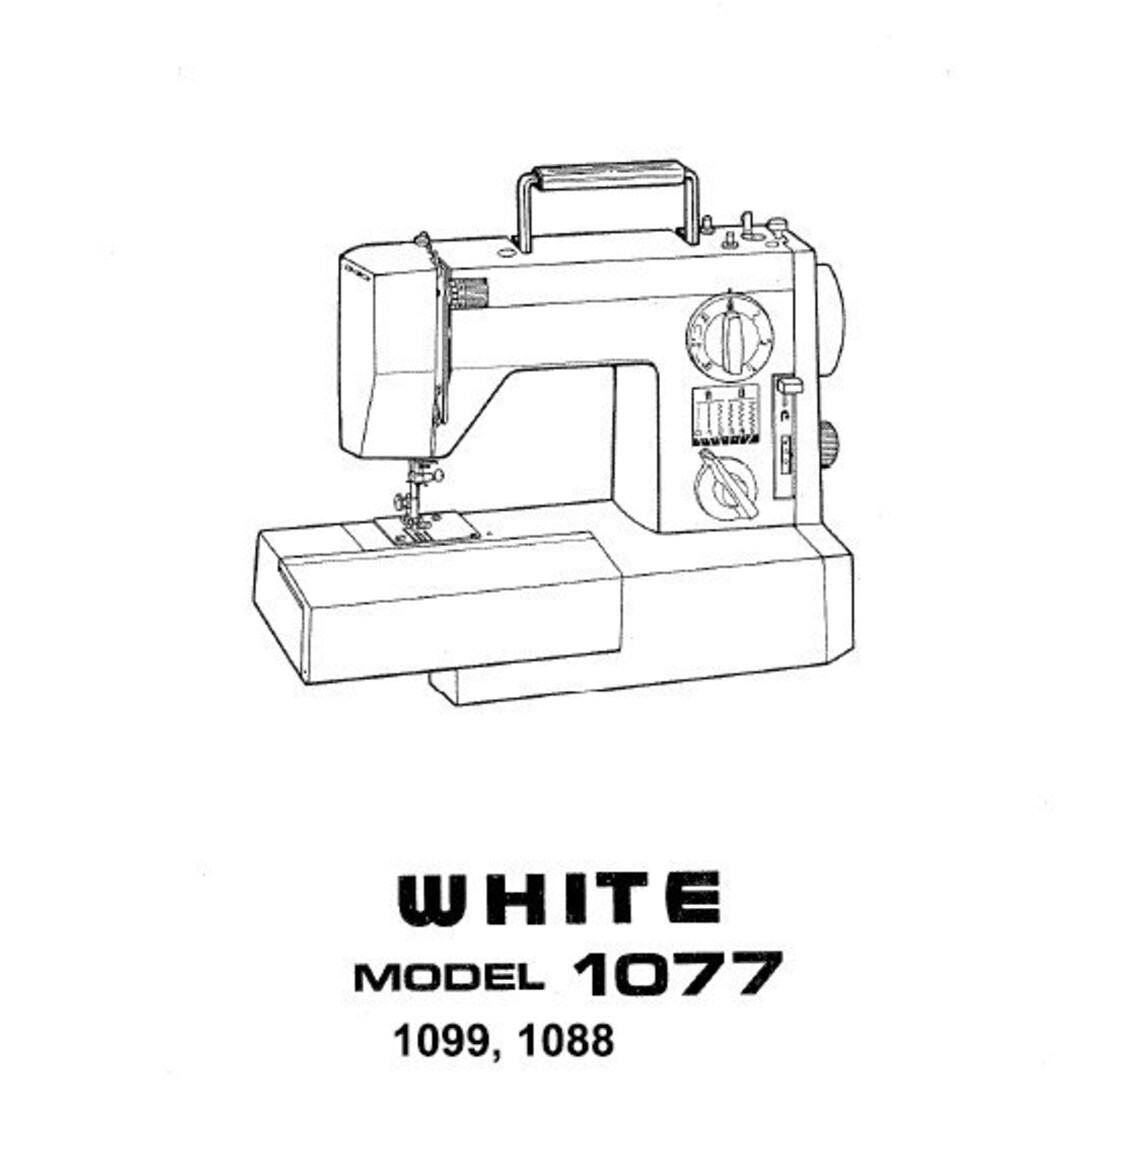 White Model 1077 1088 1099 Sewing Machine Manual Instant | Etsy